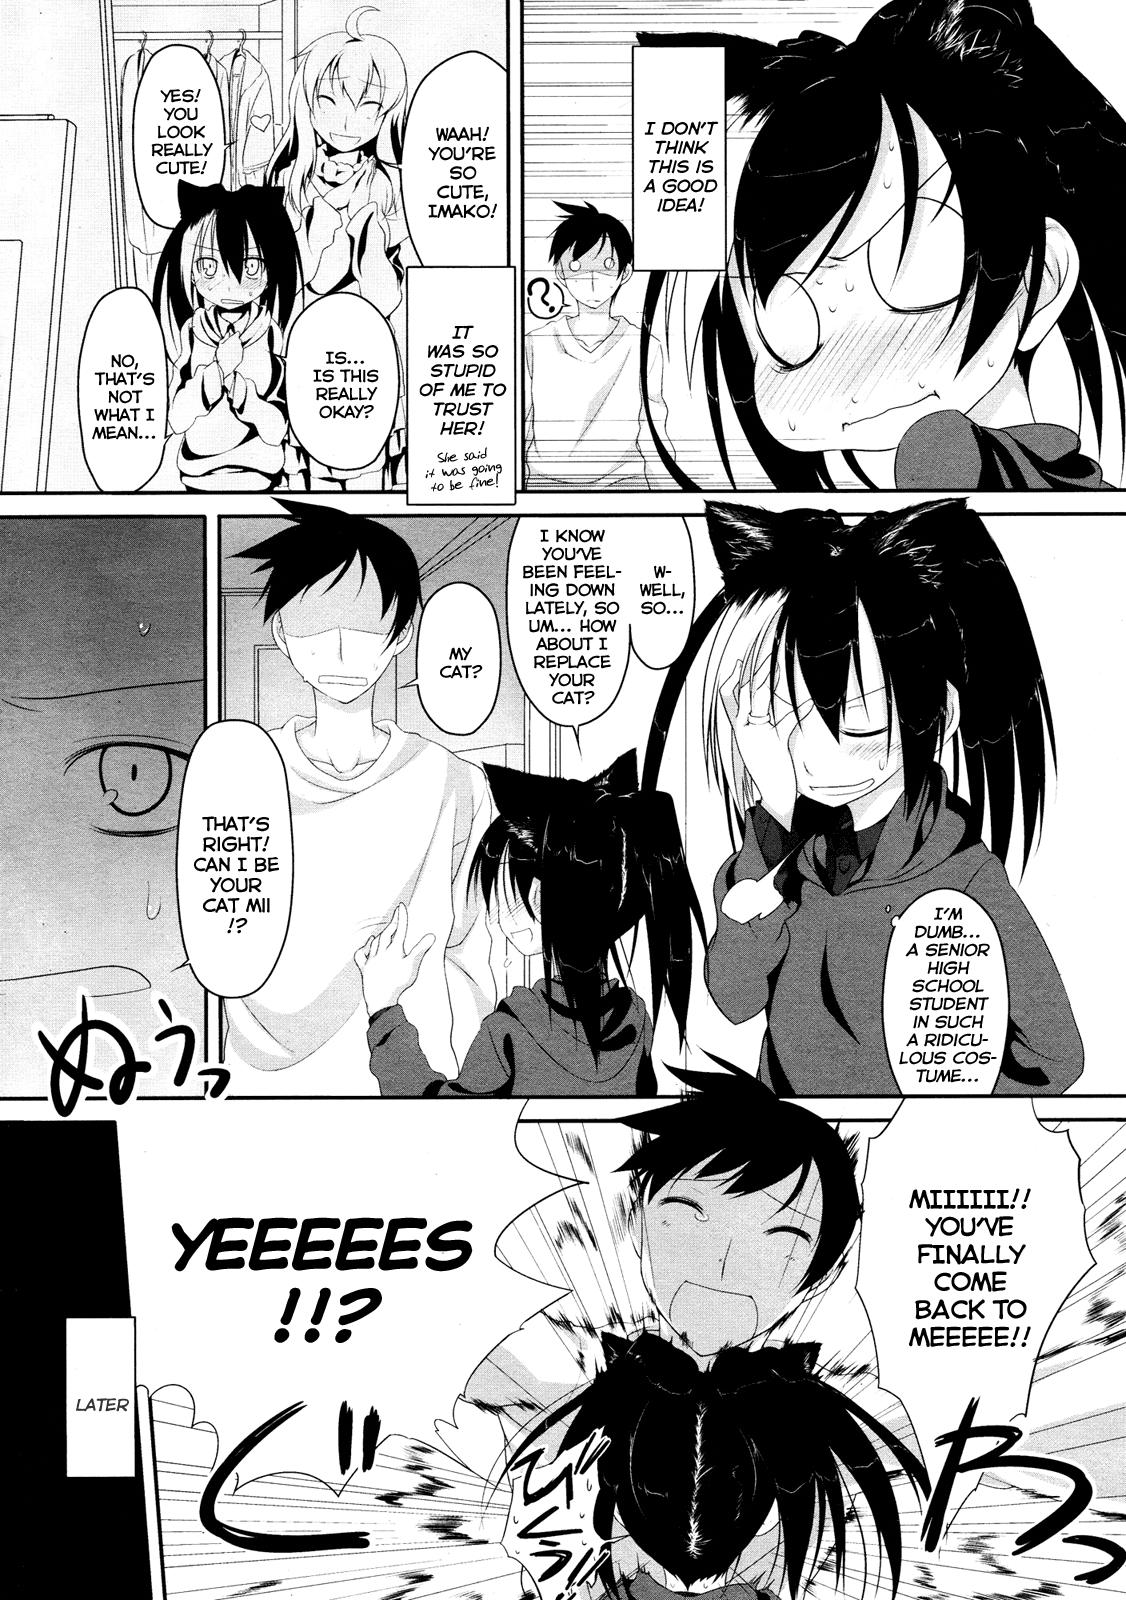 Cut Imako System Ch. 3-9 Yanks Featured - Page 3